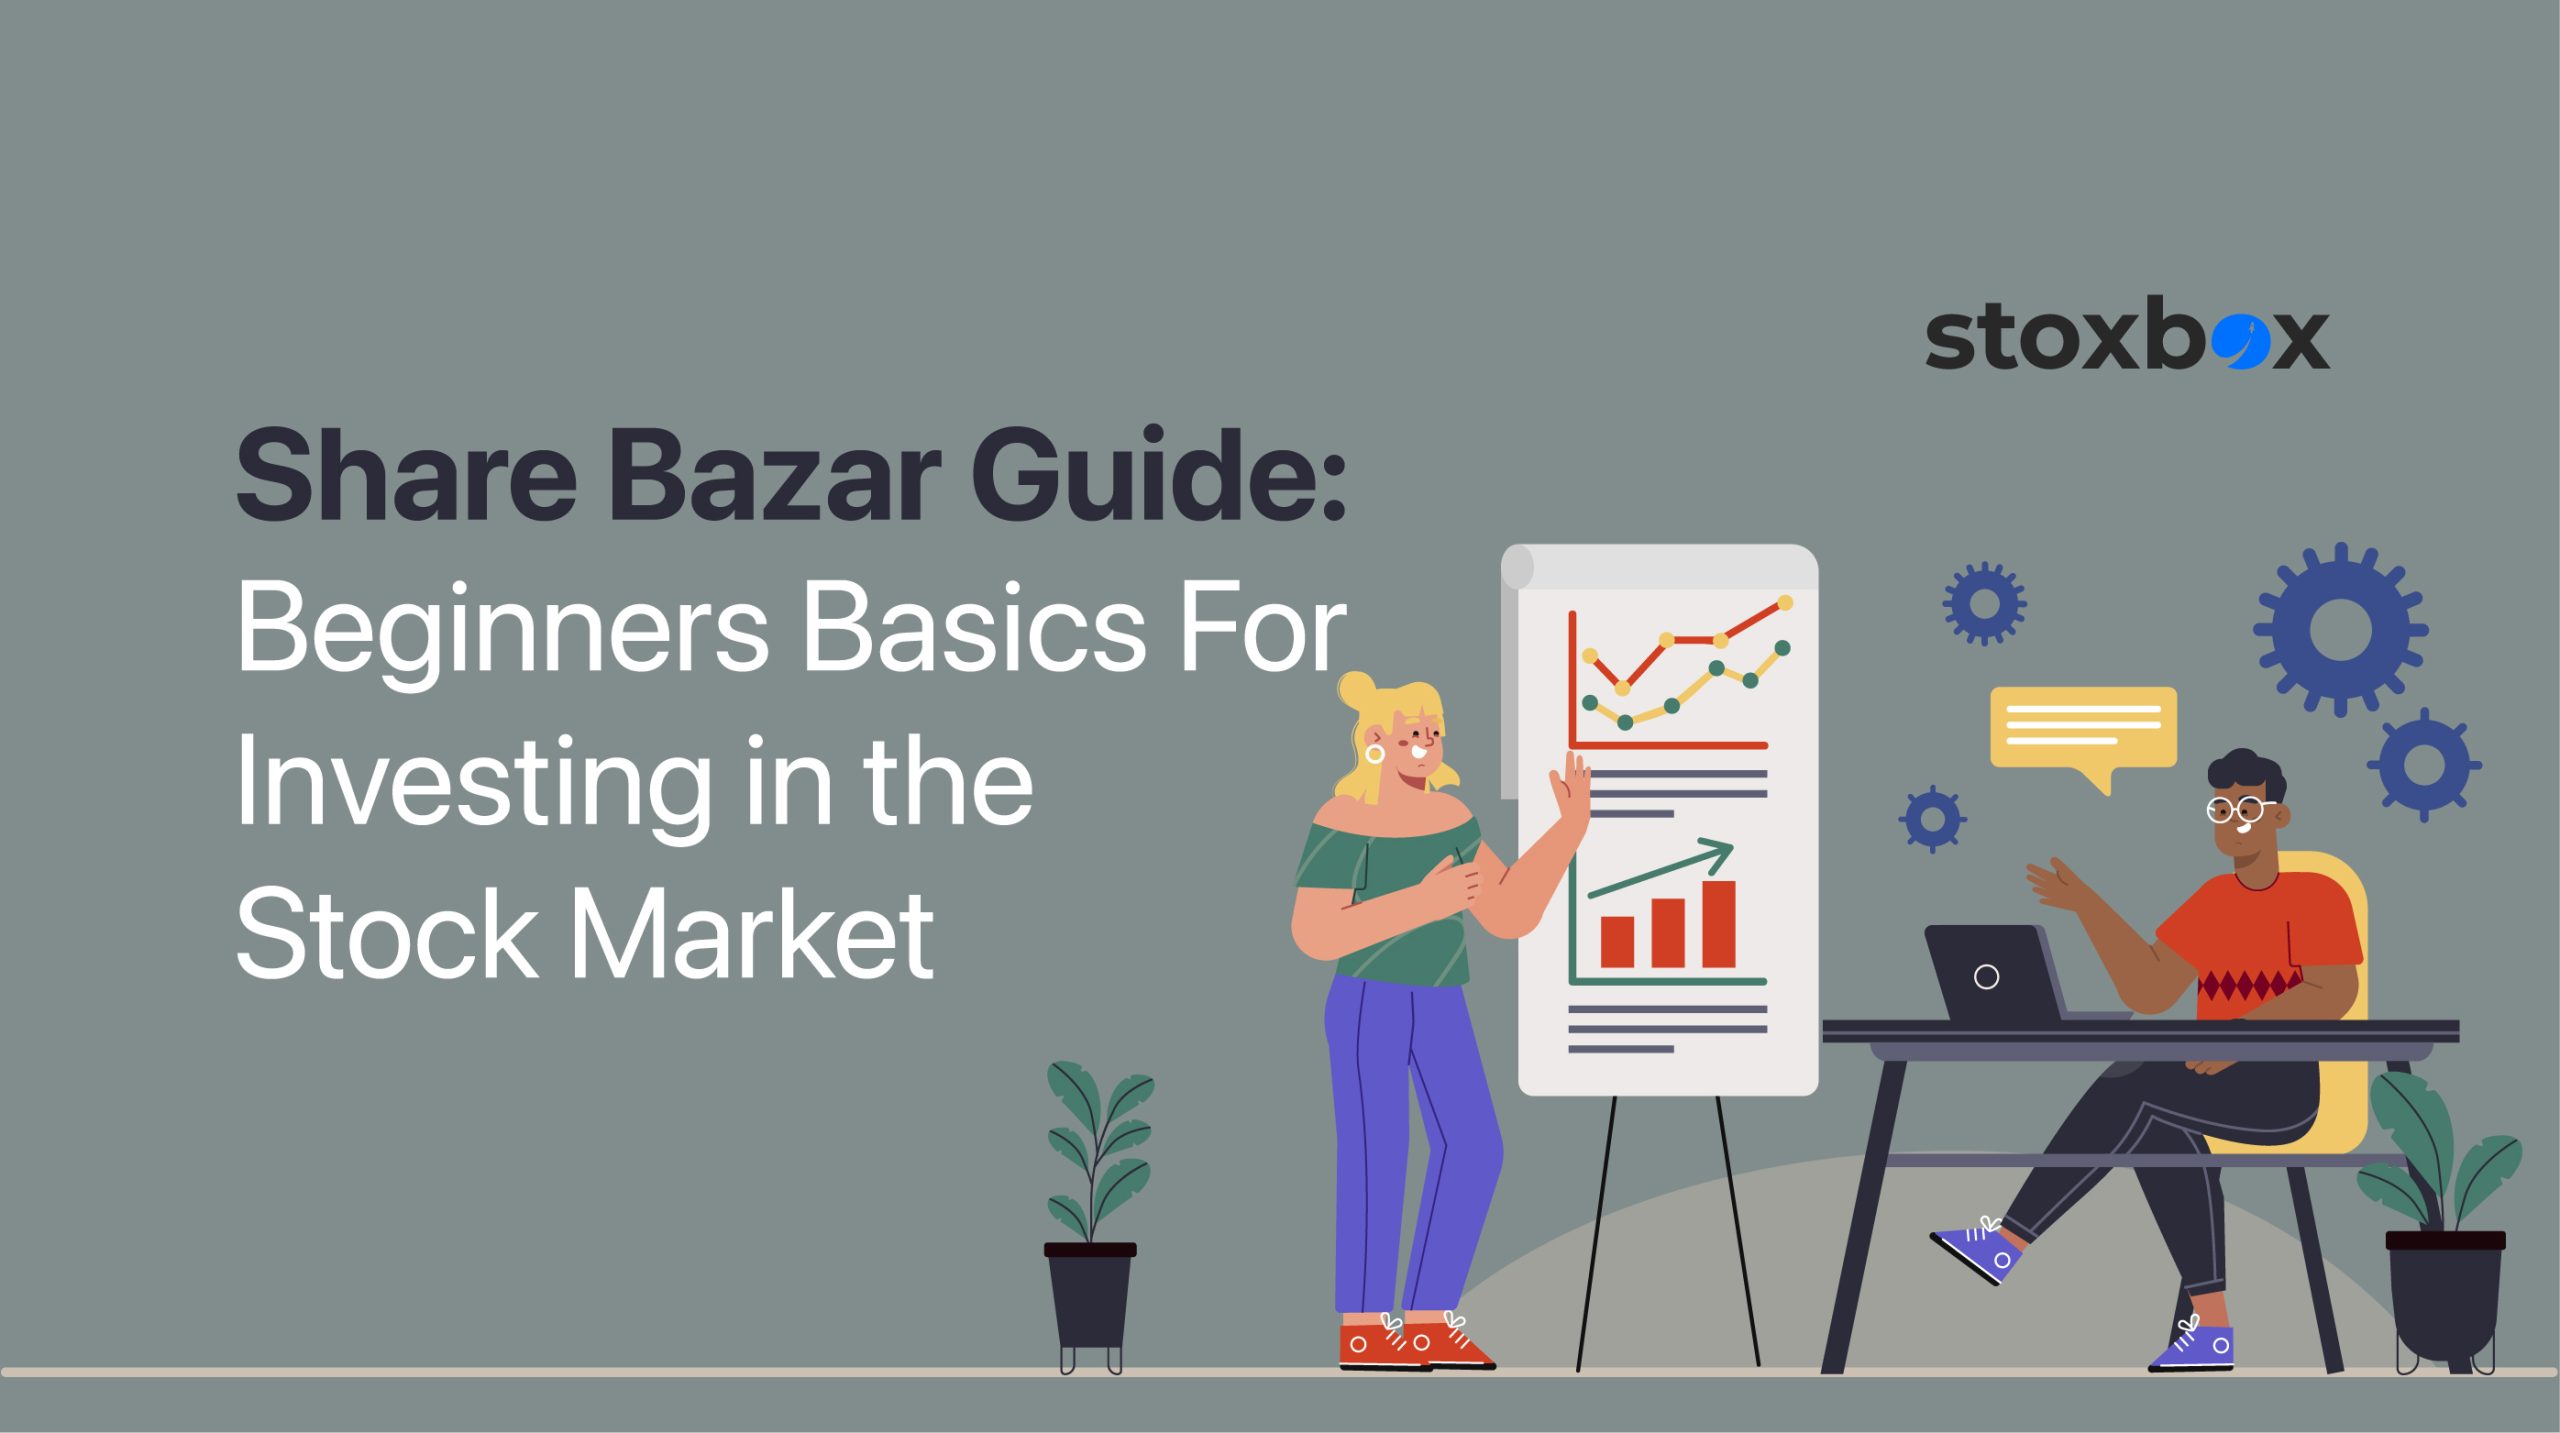 Share Bazar Guide: Beginners Basics For Investing in the Stock Market